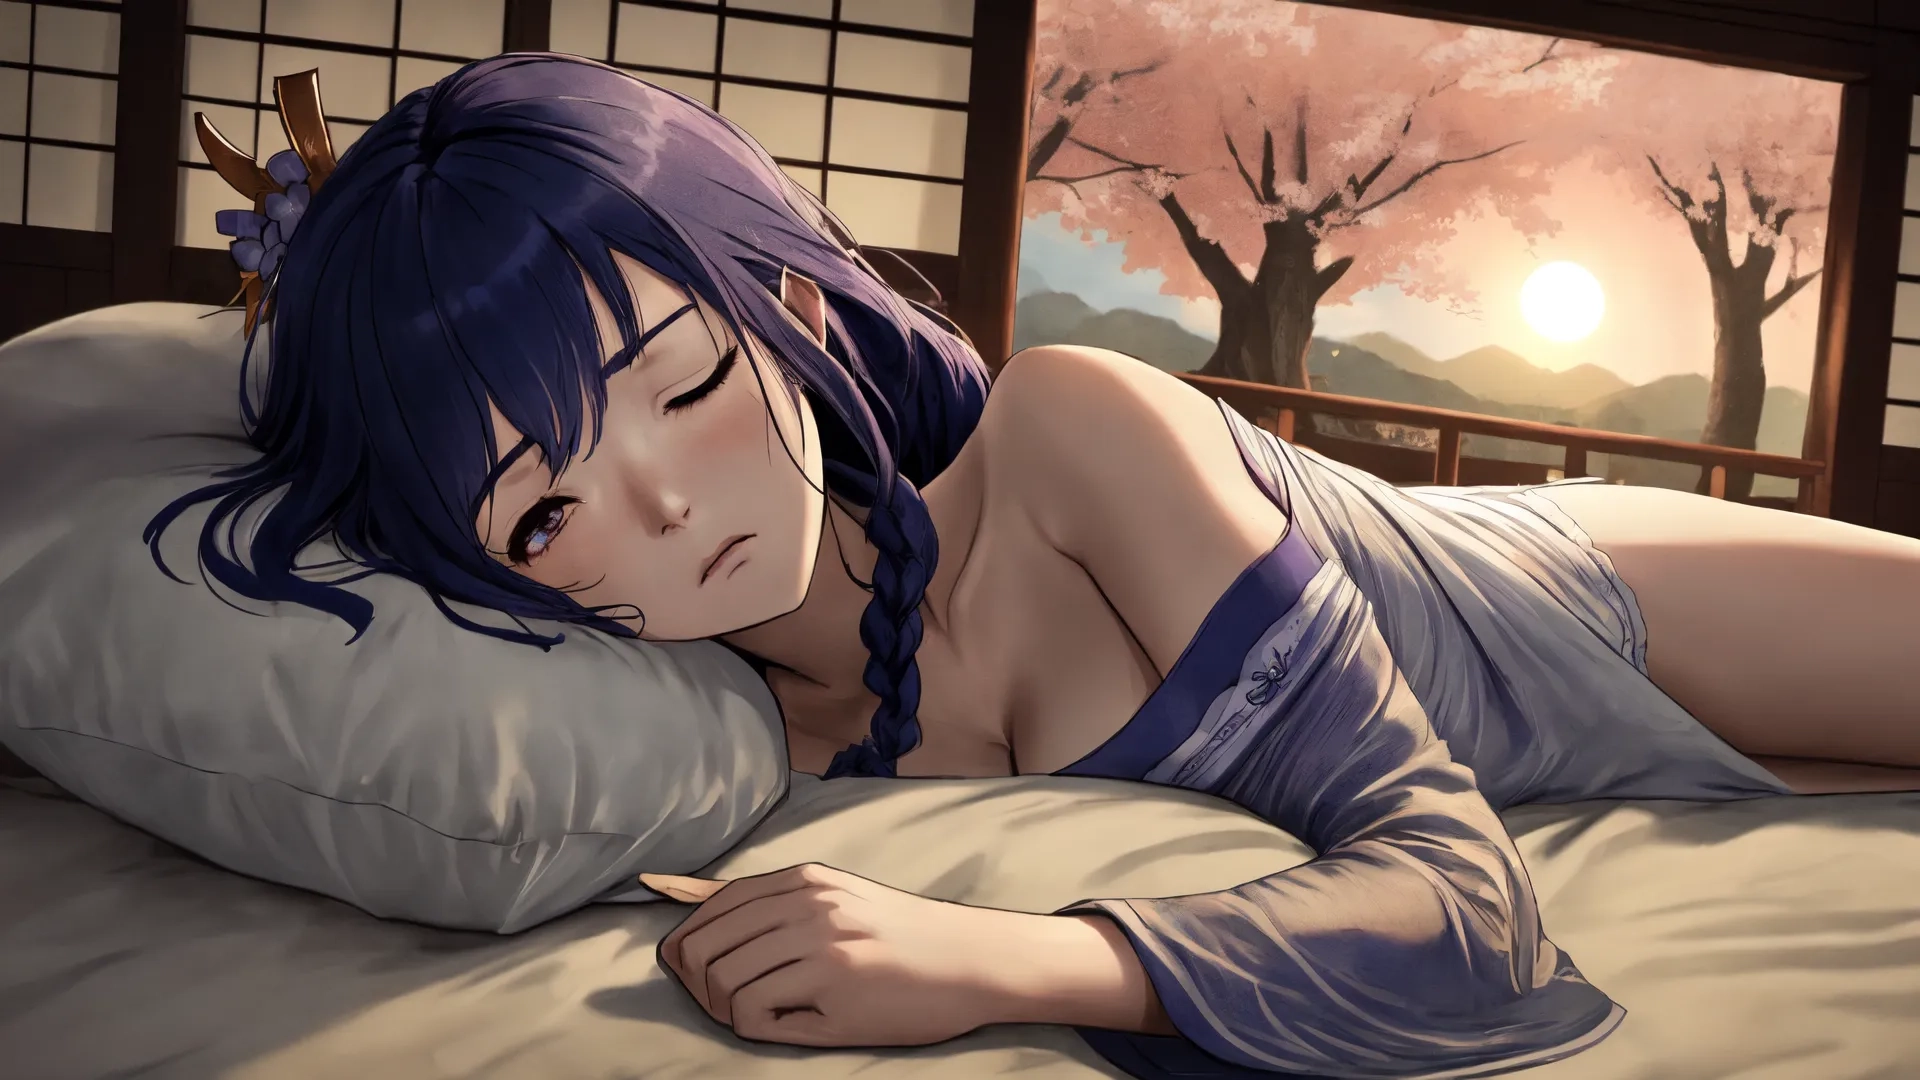 anime girl laying on a bed with pillows in front of windows and a tree outside of the room, with a blanket around her and pillows on the side to the floor
